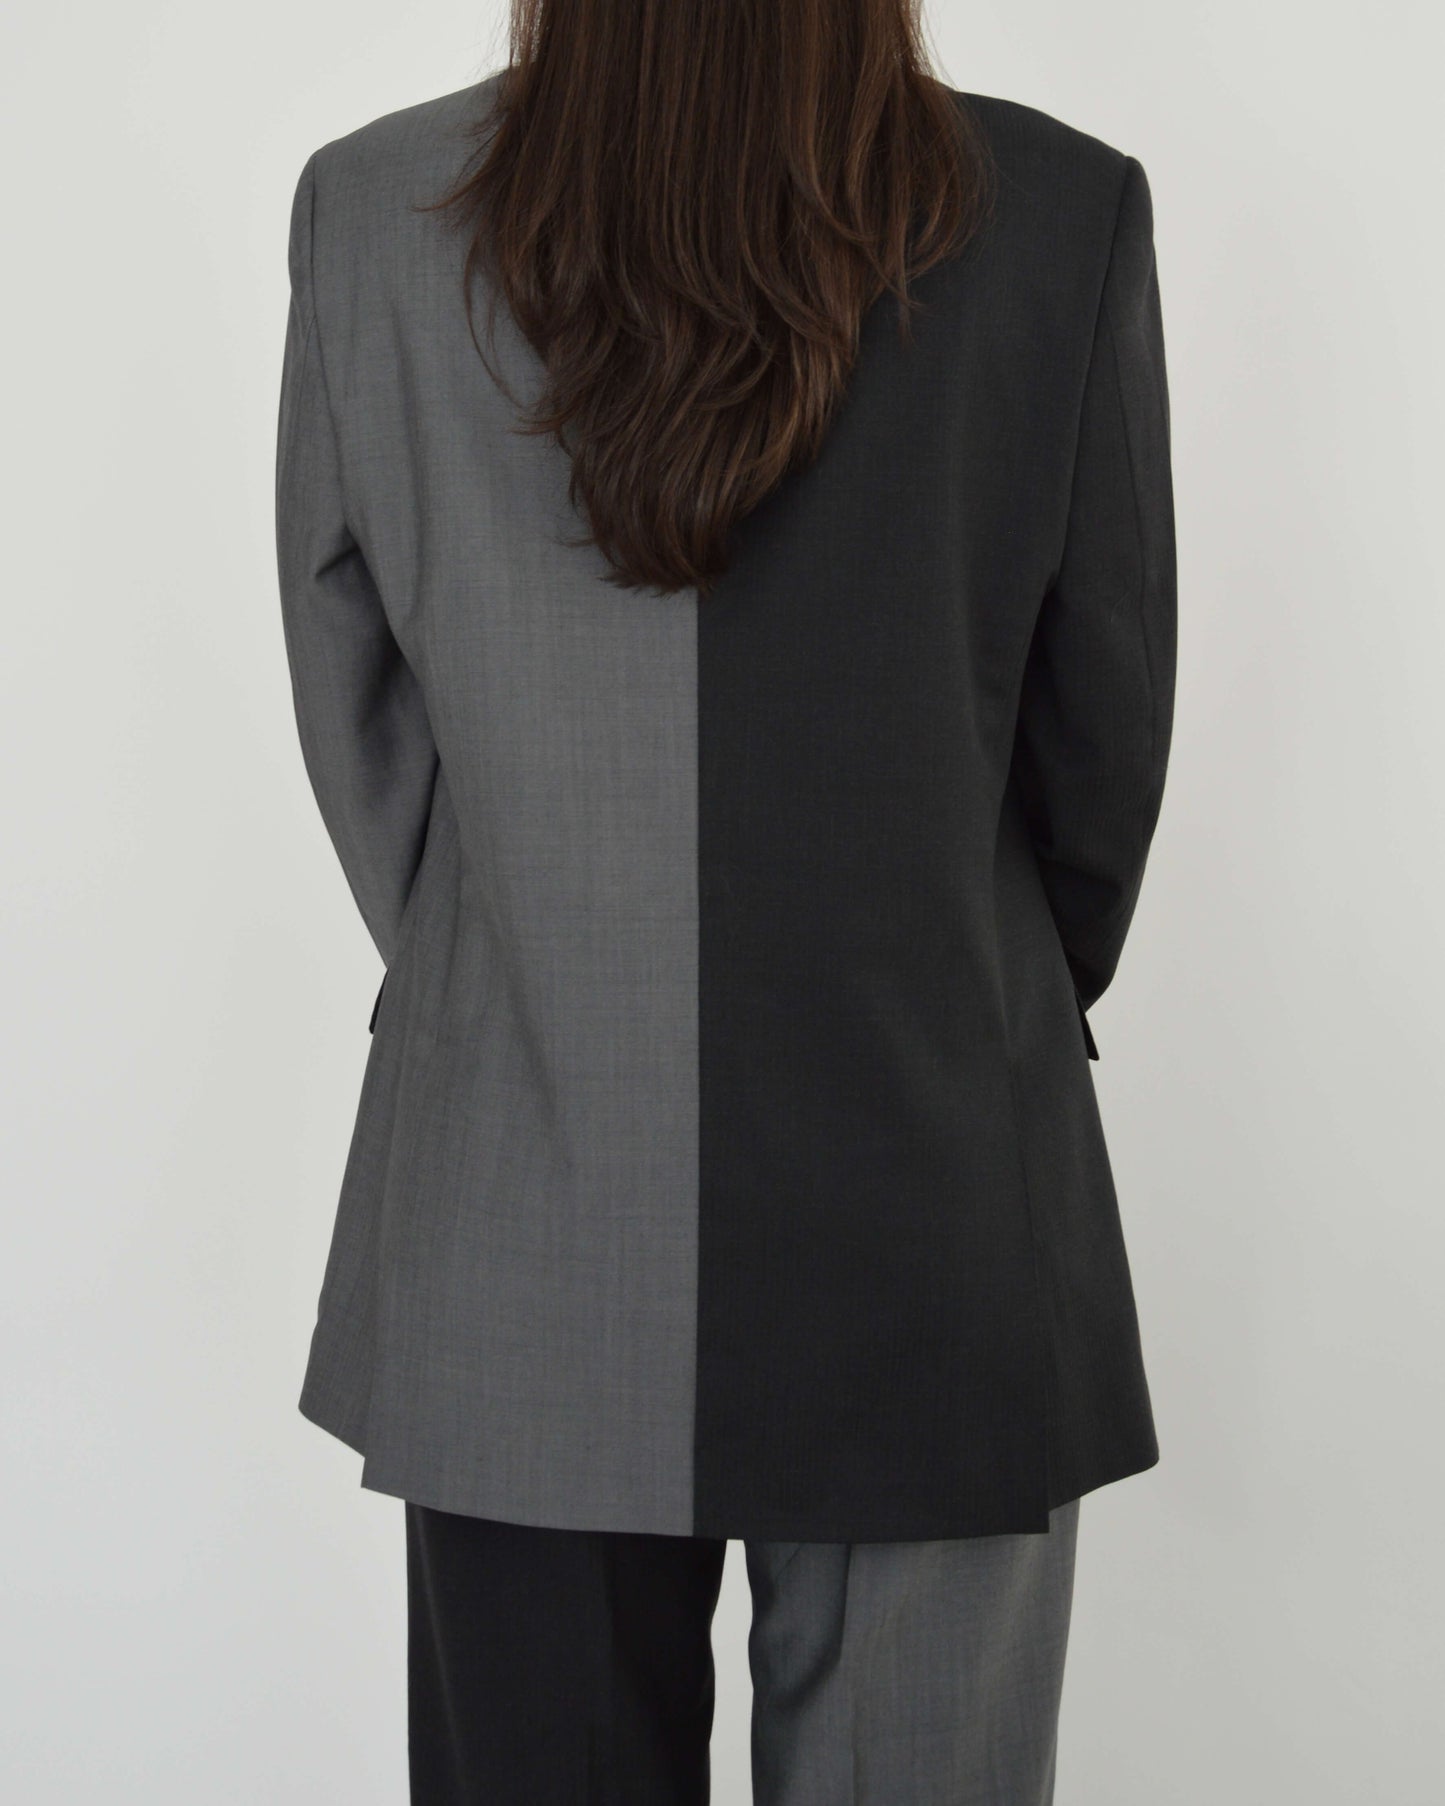 DUO Suit - Perfect Contrast (S/M)